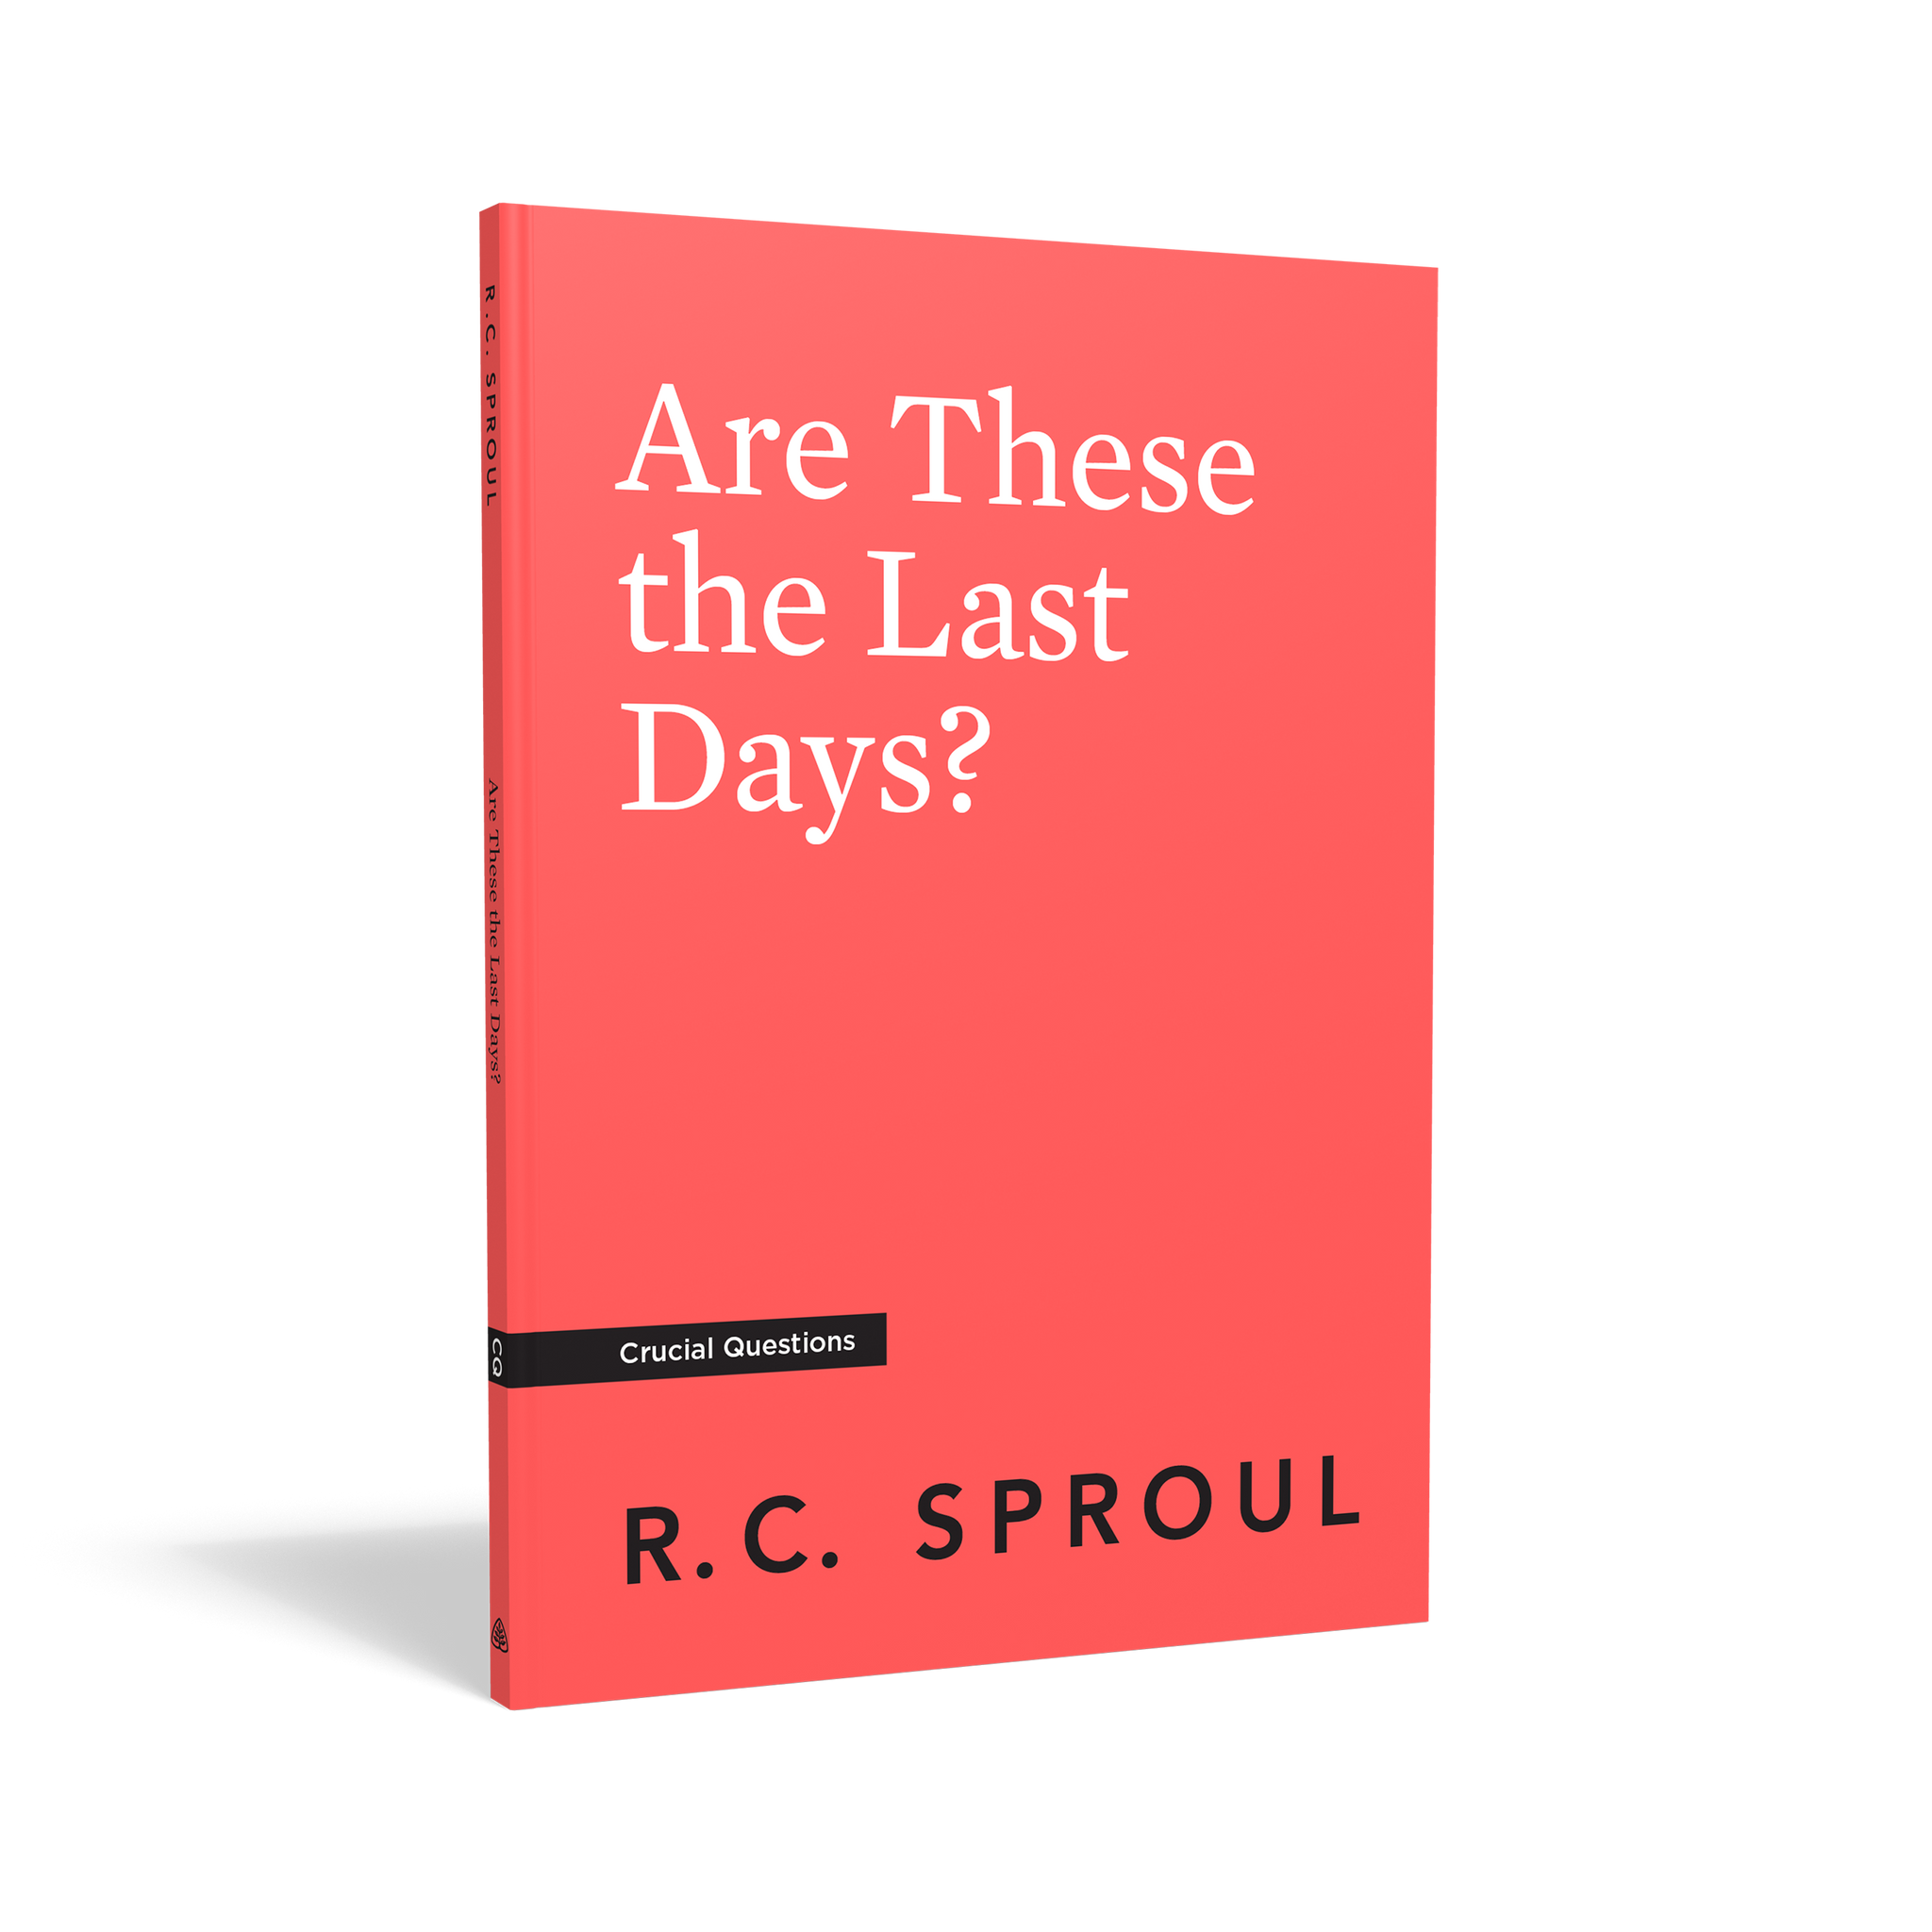 Crucial Questions - Are These the Last Days?